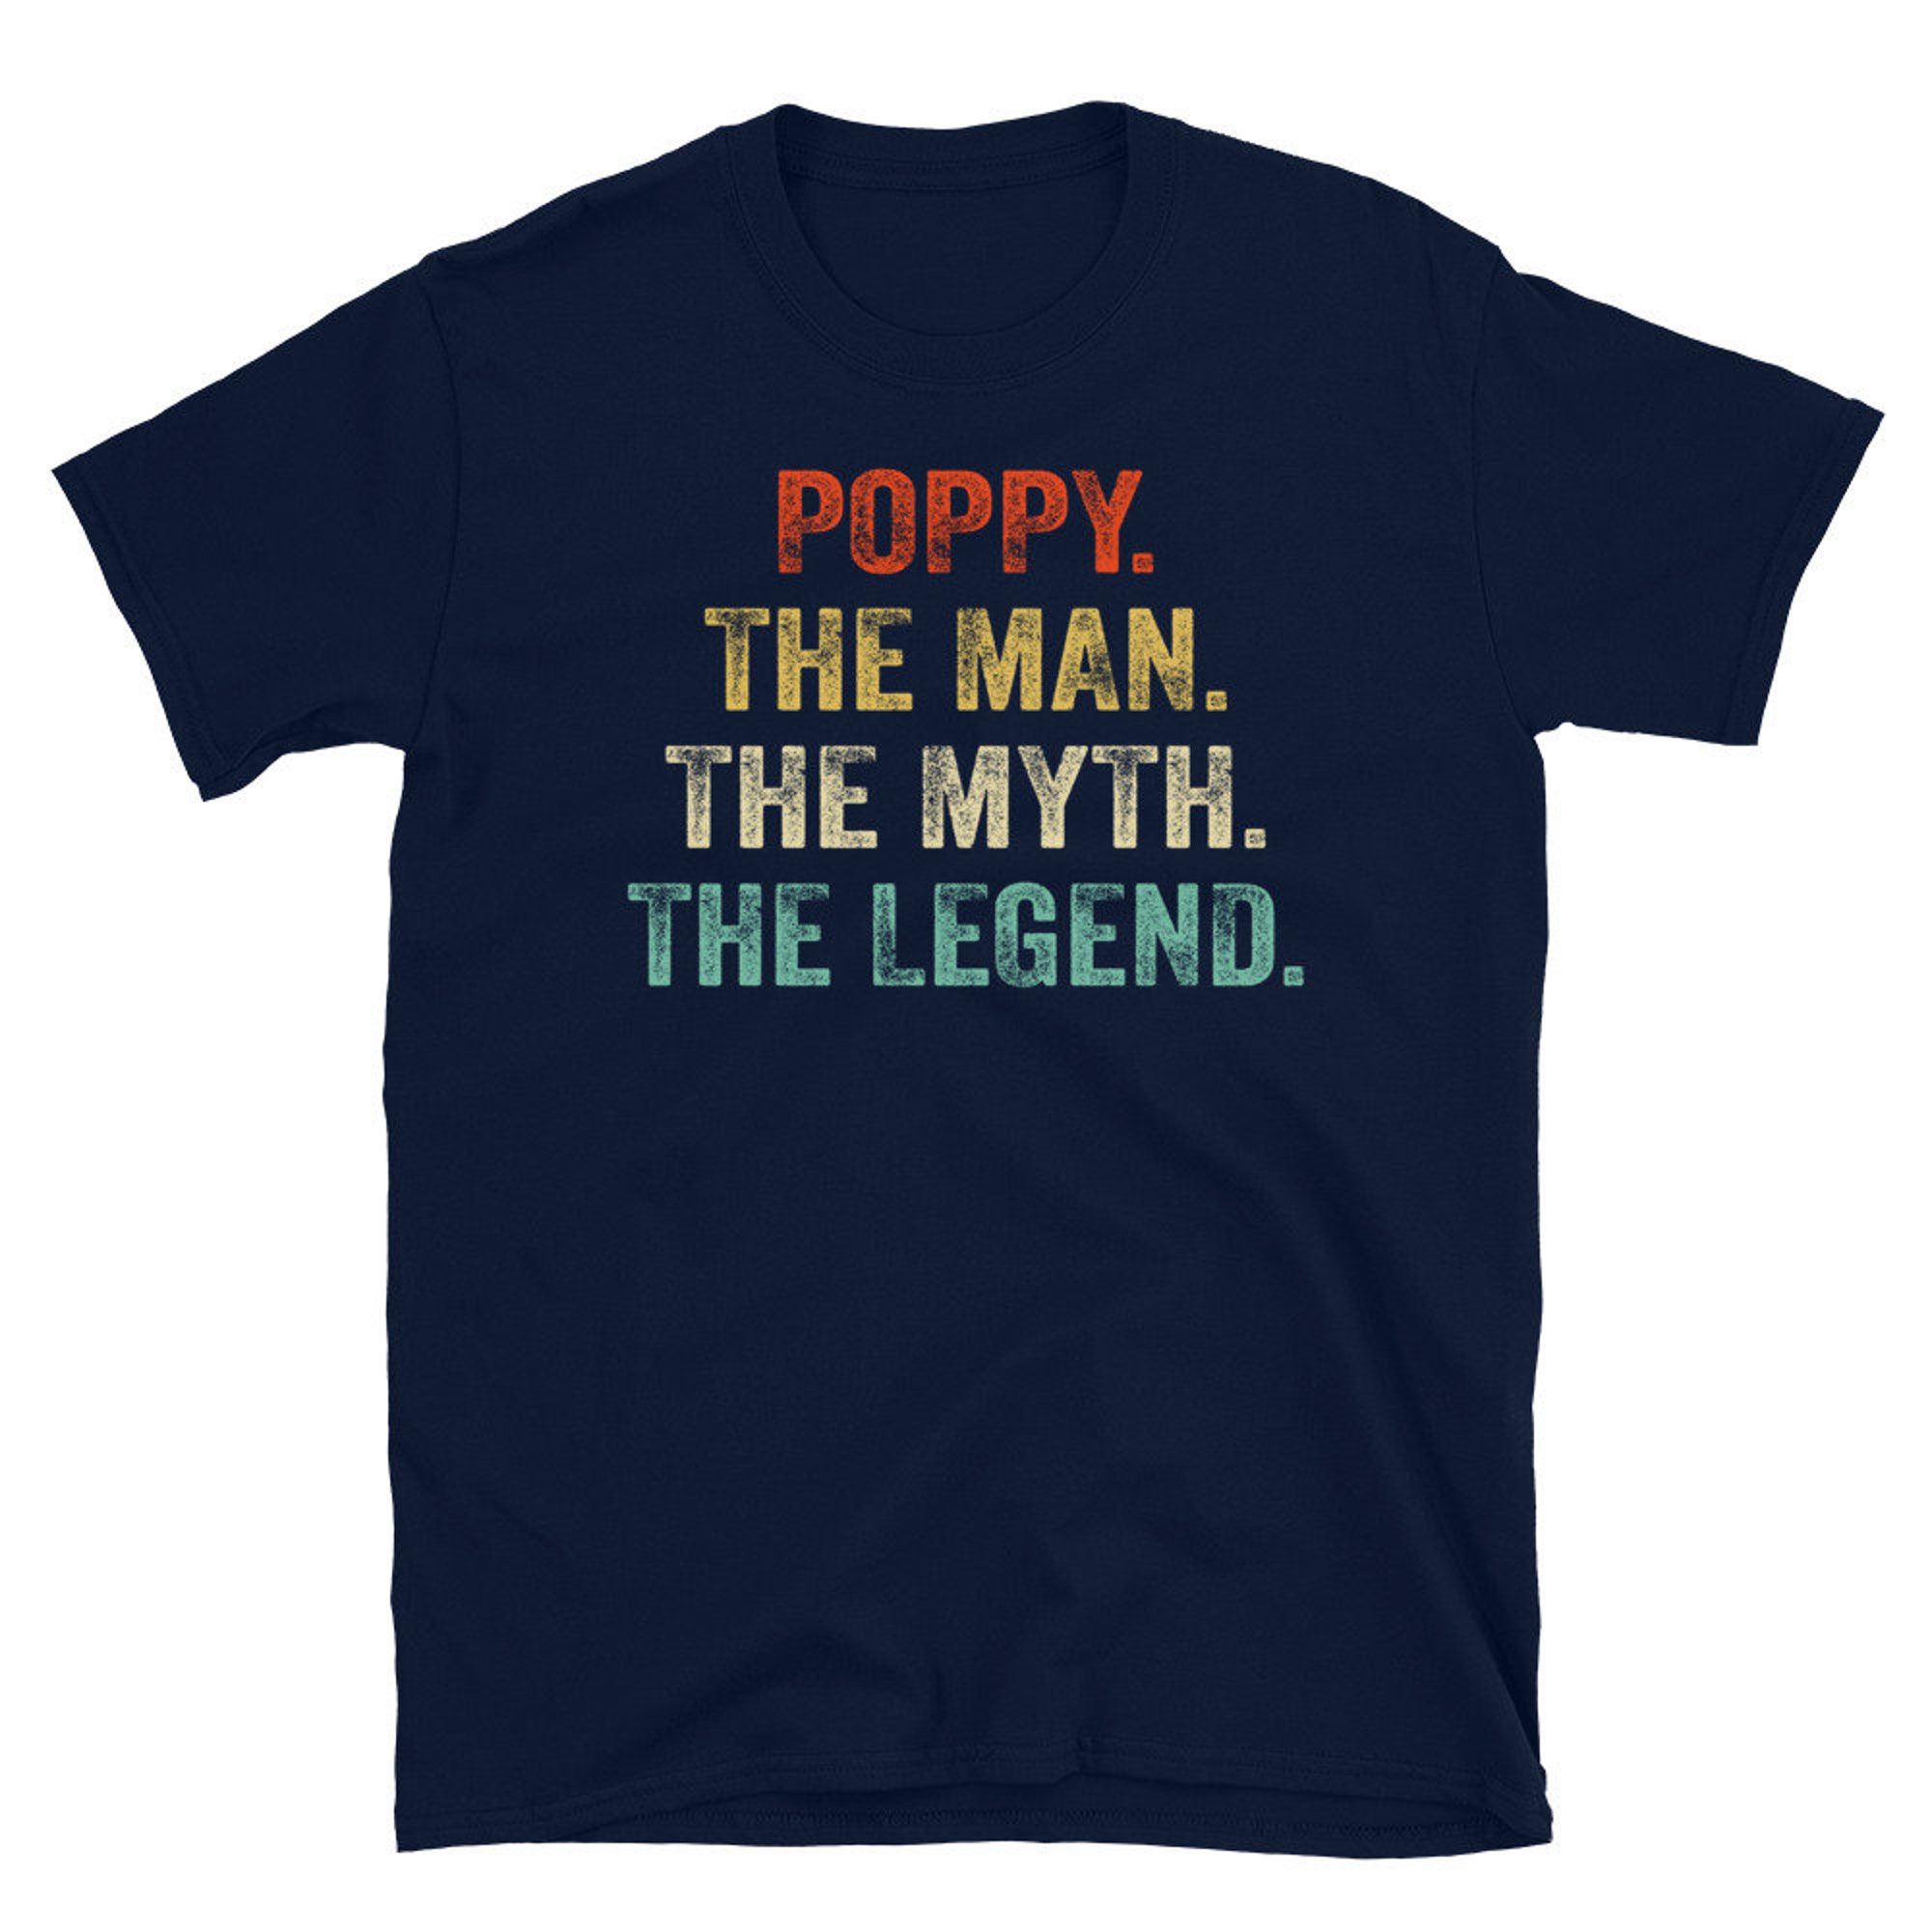 Discover Poppy T Shirt, Poppy Funny TShirt, Customized Shirt The Man The Myth The Legend, Papa Tees, Fathers Day Shirt 2022 Gift Personalized Shirt